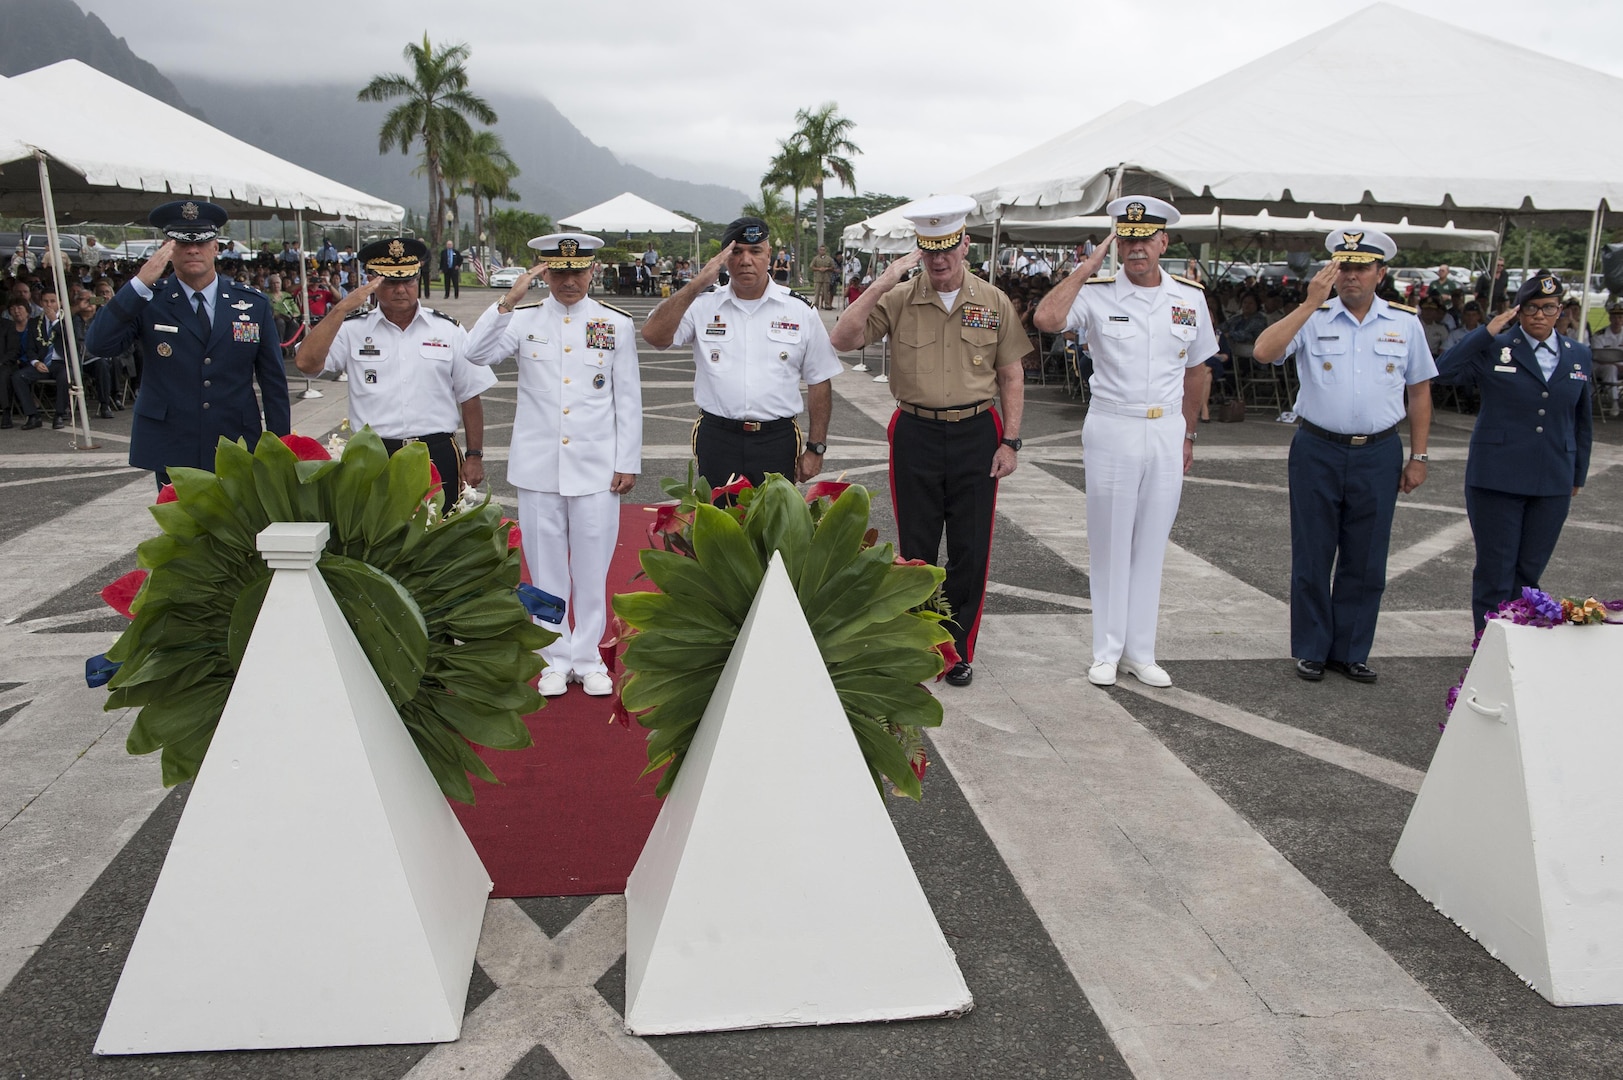 U.S. Navy Adm. Harry Harris, commander of U.S. Pacific Command (PACOM), salutes a military wreath alongside leaders of PACOM and the U.S. Coast Guard during the 2015 Governor’s Veterans Day Ceremony at the Hawaii State Veterans Cemetery Nov. 11, in Kaneohe, Hawaii. U.S. Army Maj. Gen. Arthur J. Logan, the adjutant general of the state of Hawaii, and Shan Tsutsui, lieutenant governor of Hawaii, provided welcoming remarks and a keynote speech during the ceremony. (U.S. Air Force photo by Staff Sgt. Christopher Hubenthal)